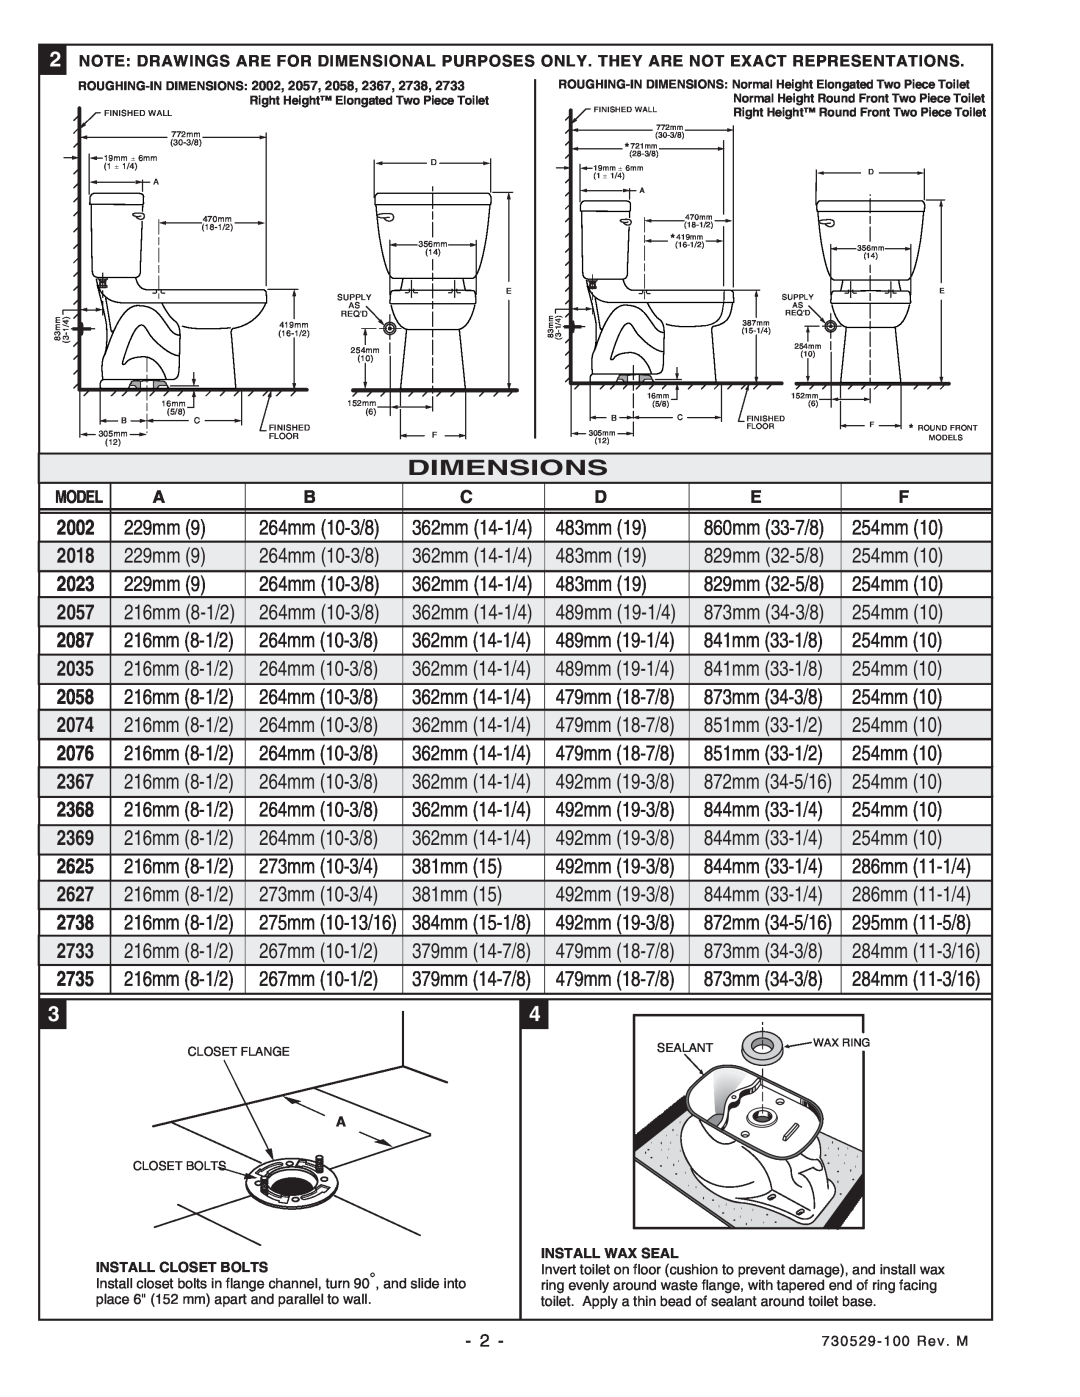 American Standard 2002, 2076 installation instructions Dimensions 